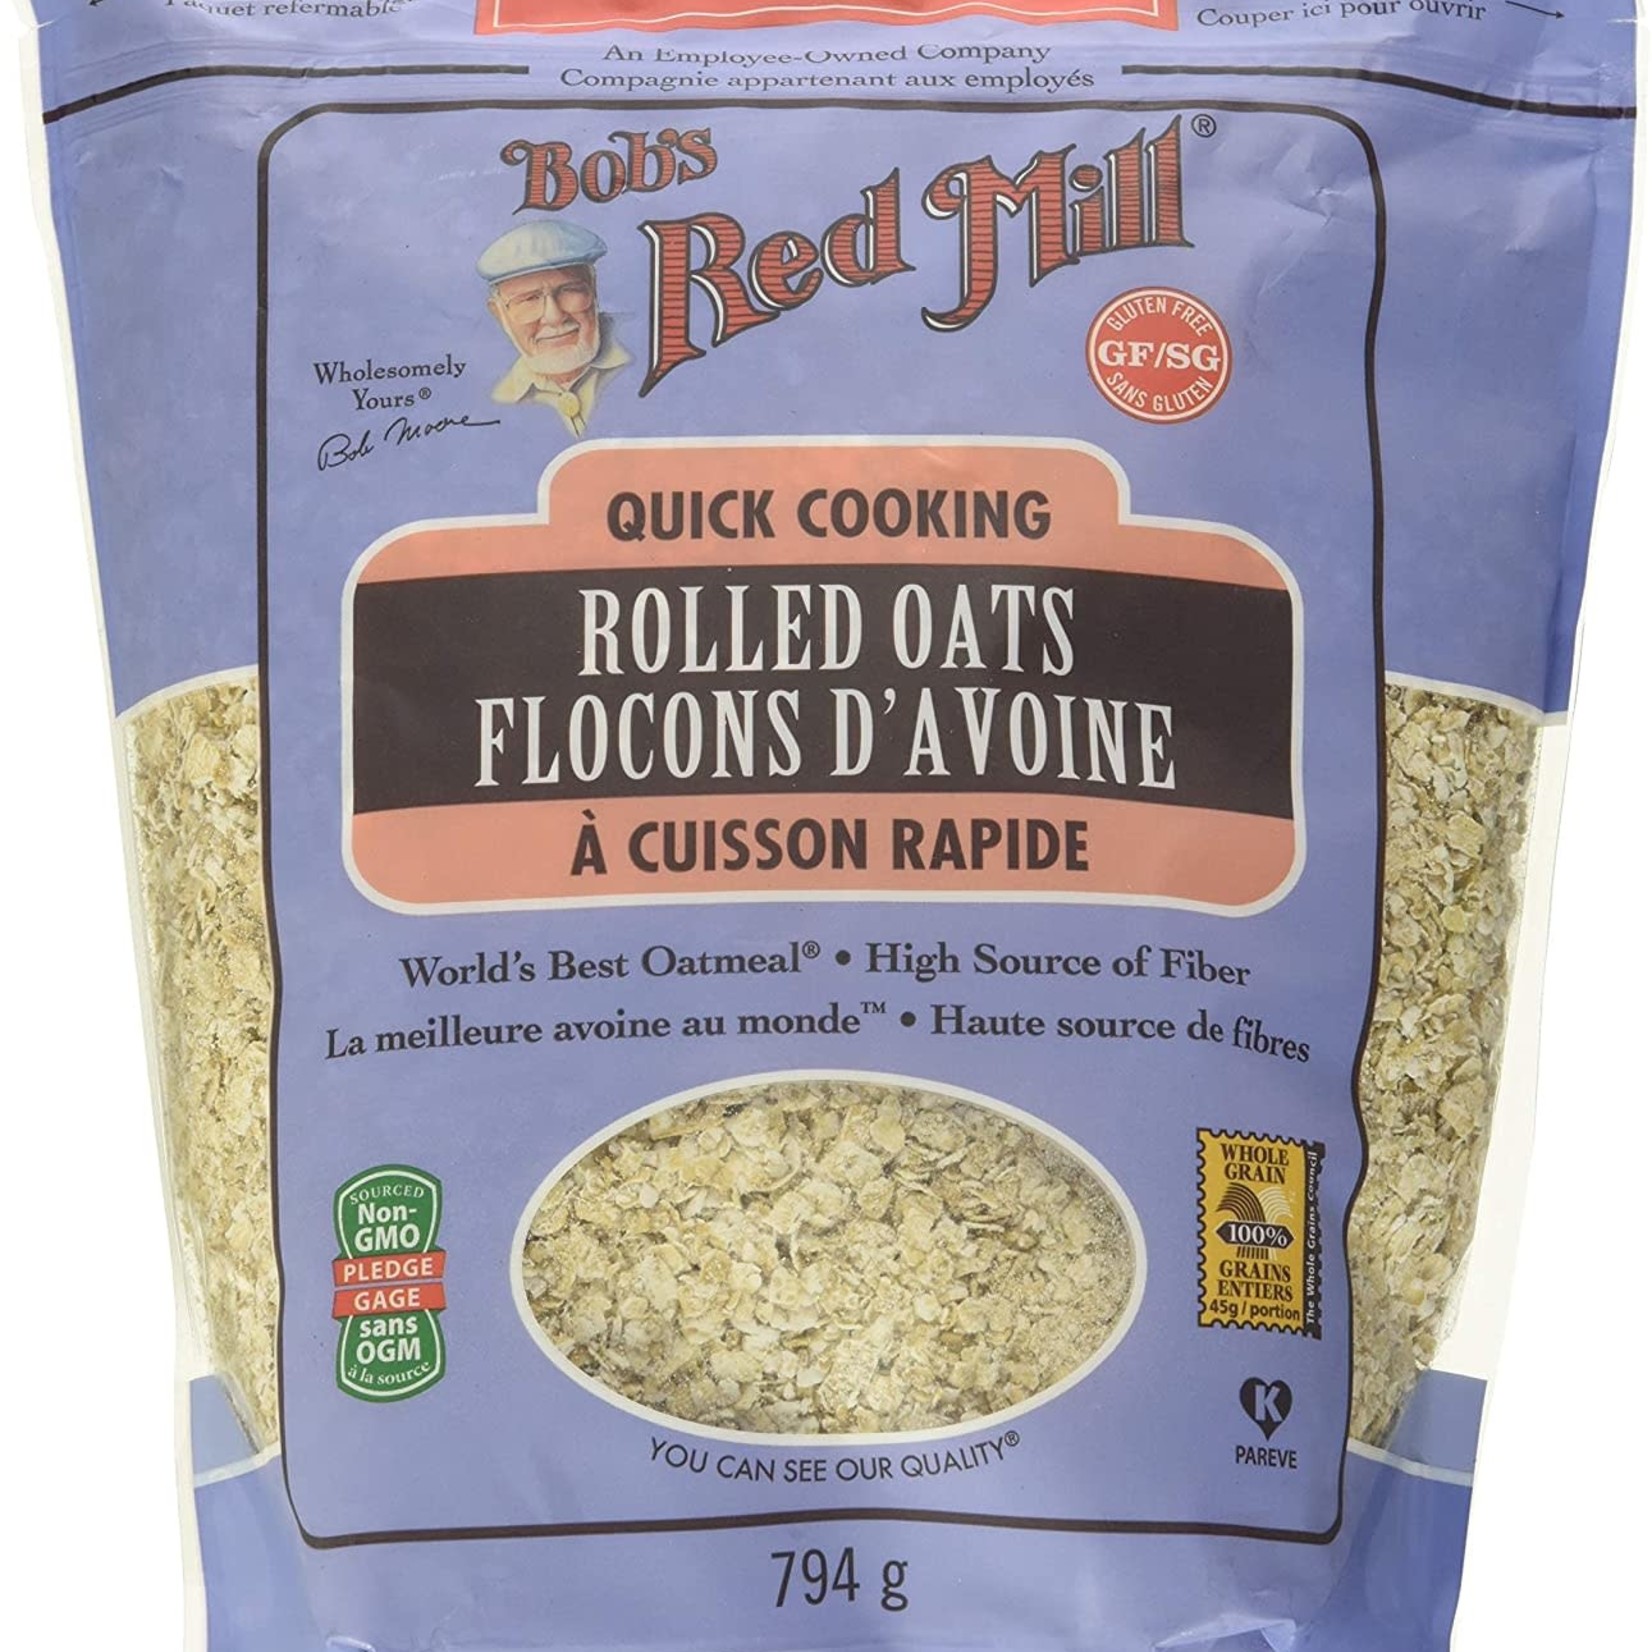 Bob's Red Mill Bob’s Red Mill Quick Cooking Rolled Oats 794g